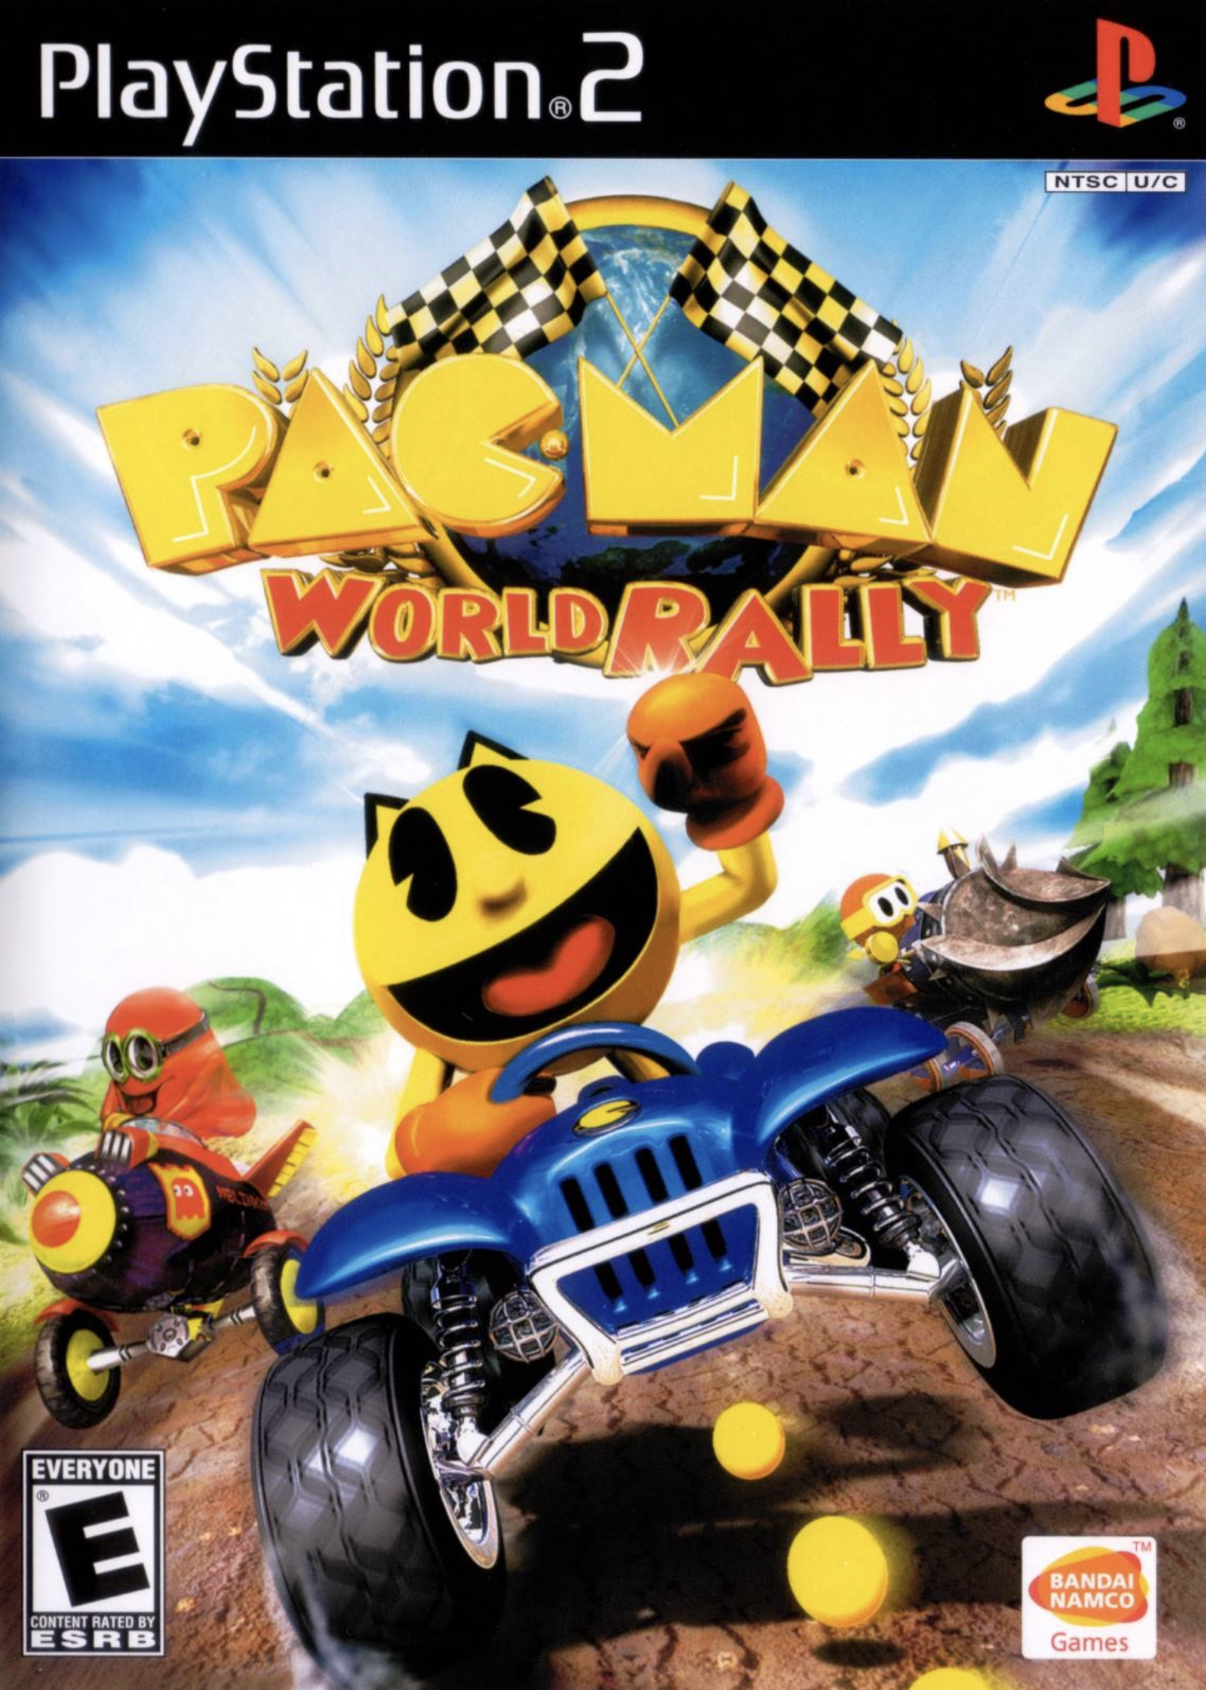 Pacman world ps2 iso download free apps windows 10